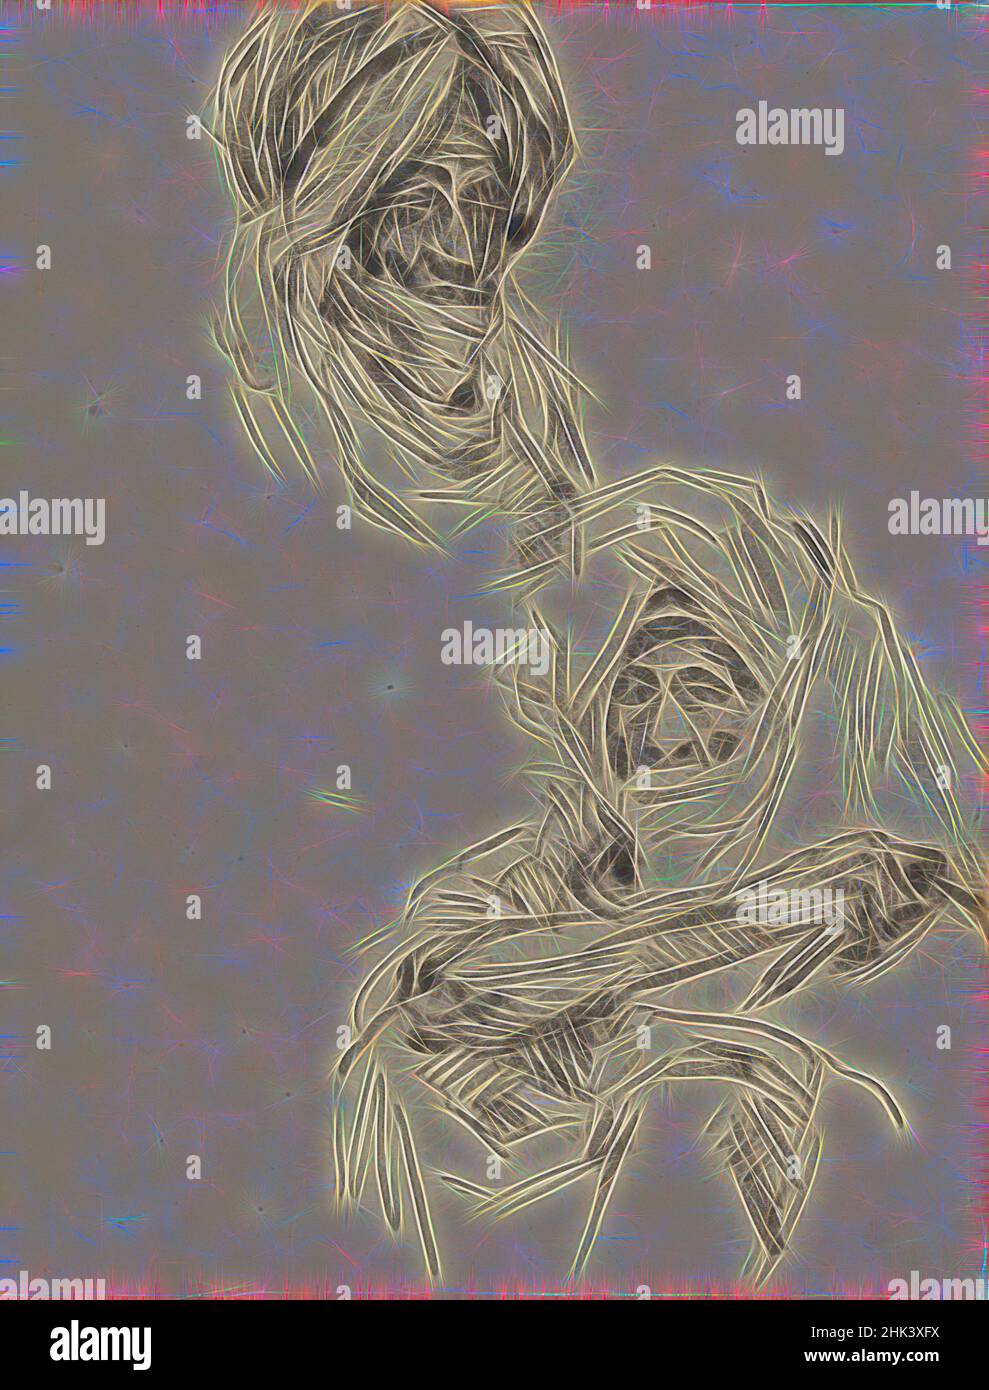 Inspired by Two Arabs, James Ensor, 1800, drawing, between circa 1885 and circa 1890, Belgian Art, Reimagined by Artotop. Classic art reinvented with a modern twist. Design of warm cheerful glowing of brightness and light ray radiance. Photography inspired by surrealism and futurism, embracing dynamic energy of modern technology, movement, speed and revolutionize culture Stock Photo